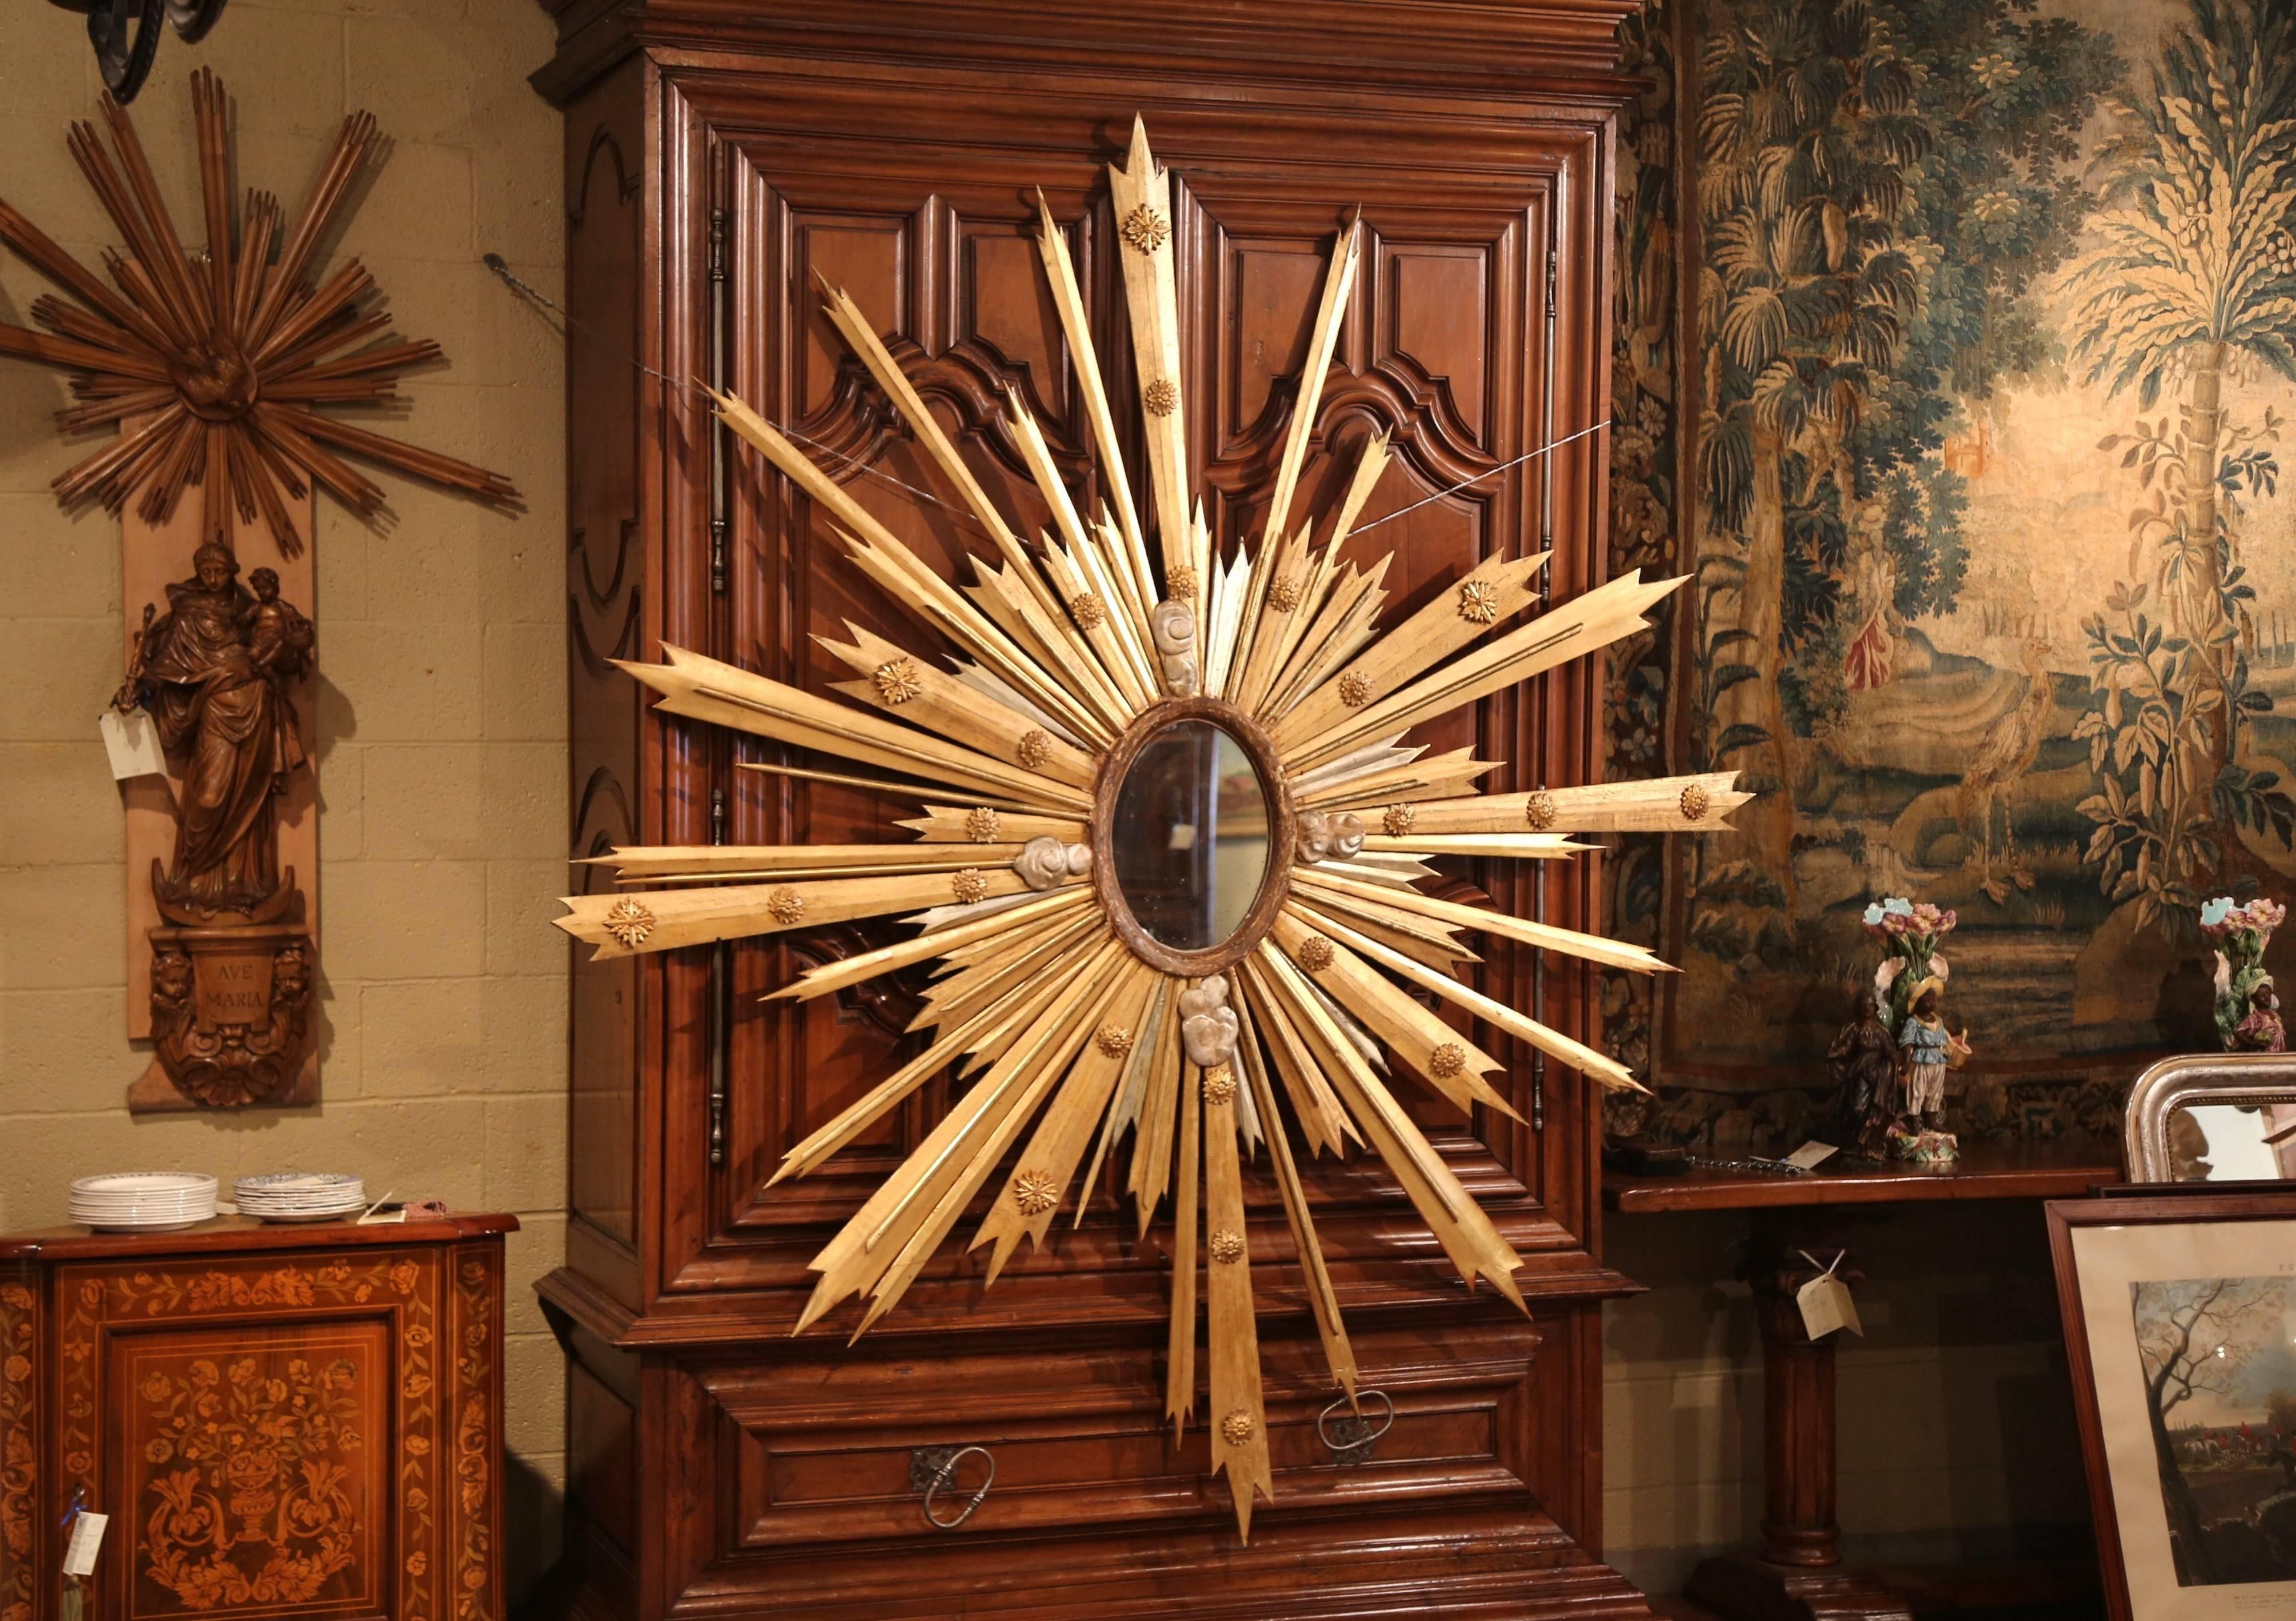 This important sunburst mirror was crafted in France, circa 1890. The monumental, stand-out piece features high relief carved decorative medallions with gilt and silvered sun beams. The piece has an oval centre mirror with its original mercury